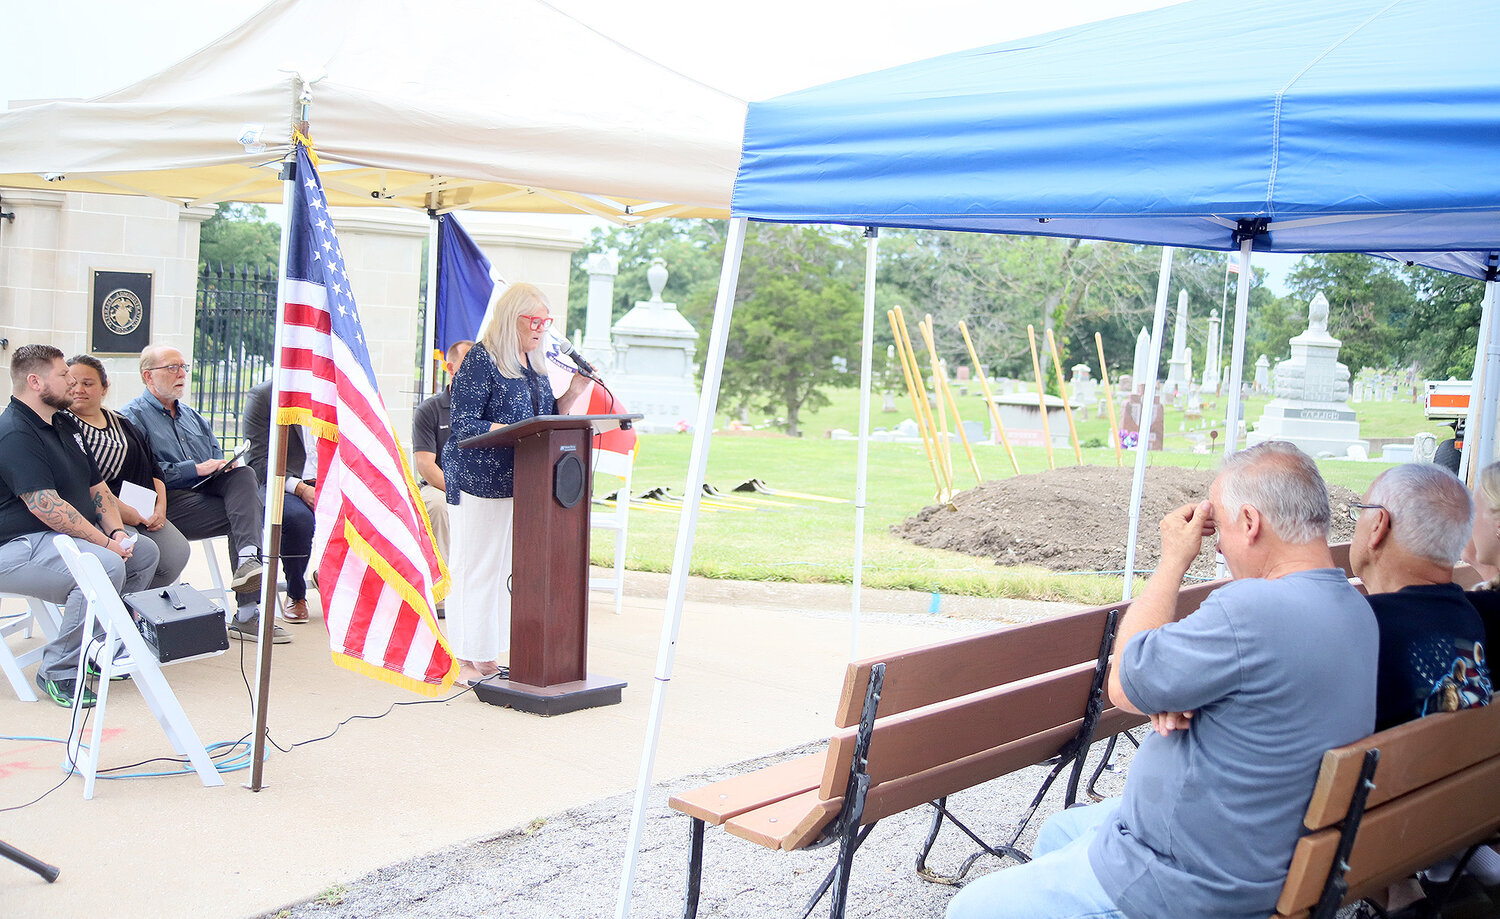 Keokuk Mayor Kathie Mahoney address a group gathered at the end of S. 18th Street in Keokuk Friday. Mahoney welcomed guests to the groundbreaking of a $3.5 million roadway resurfacing project.